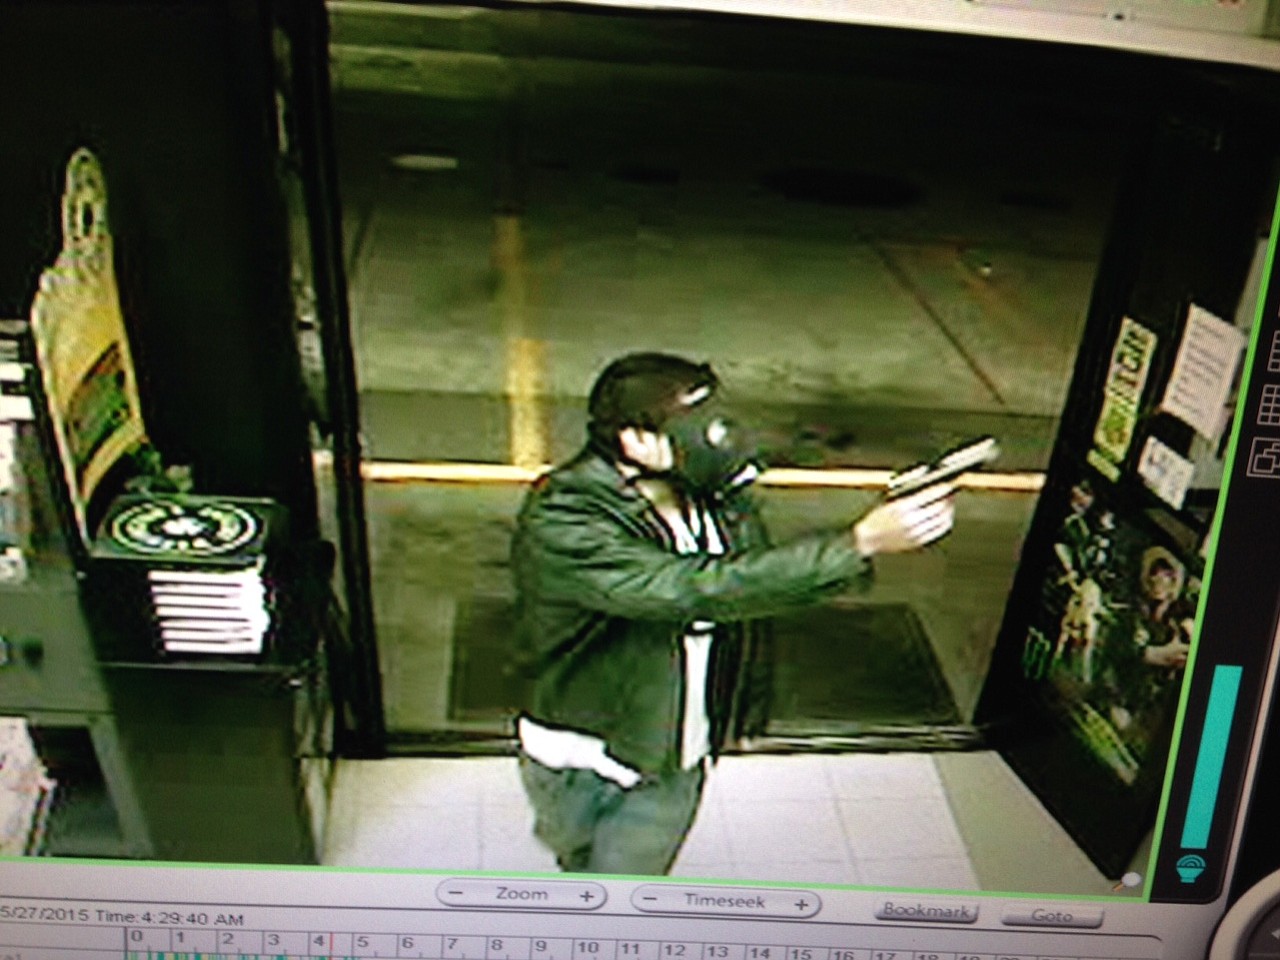 Anyone with information on the incident or knows the identity of the robbery suspect is asked to contact Detective Neil Martin at 360-487-7423 or neil.martin@cityofvanouver.us.